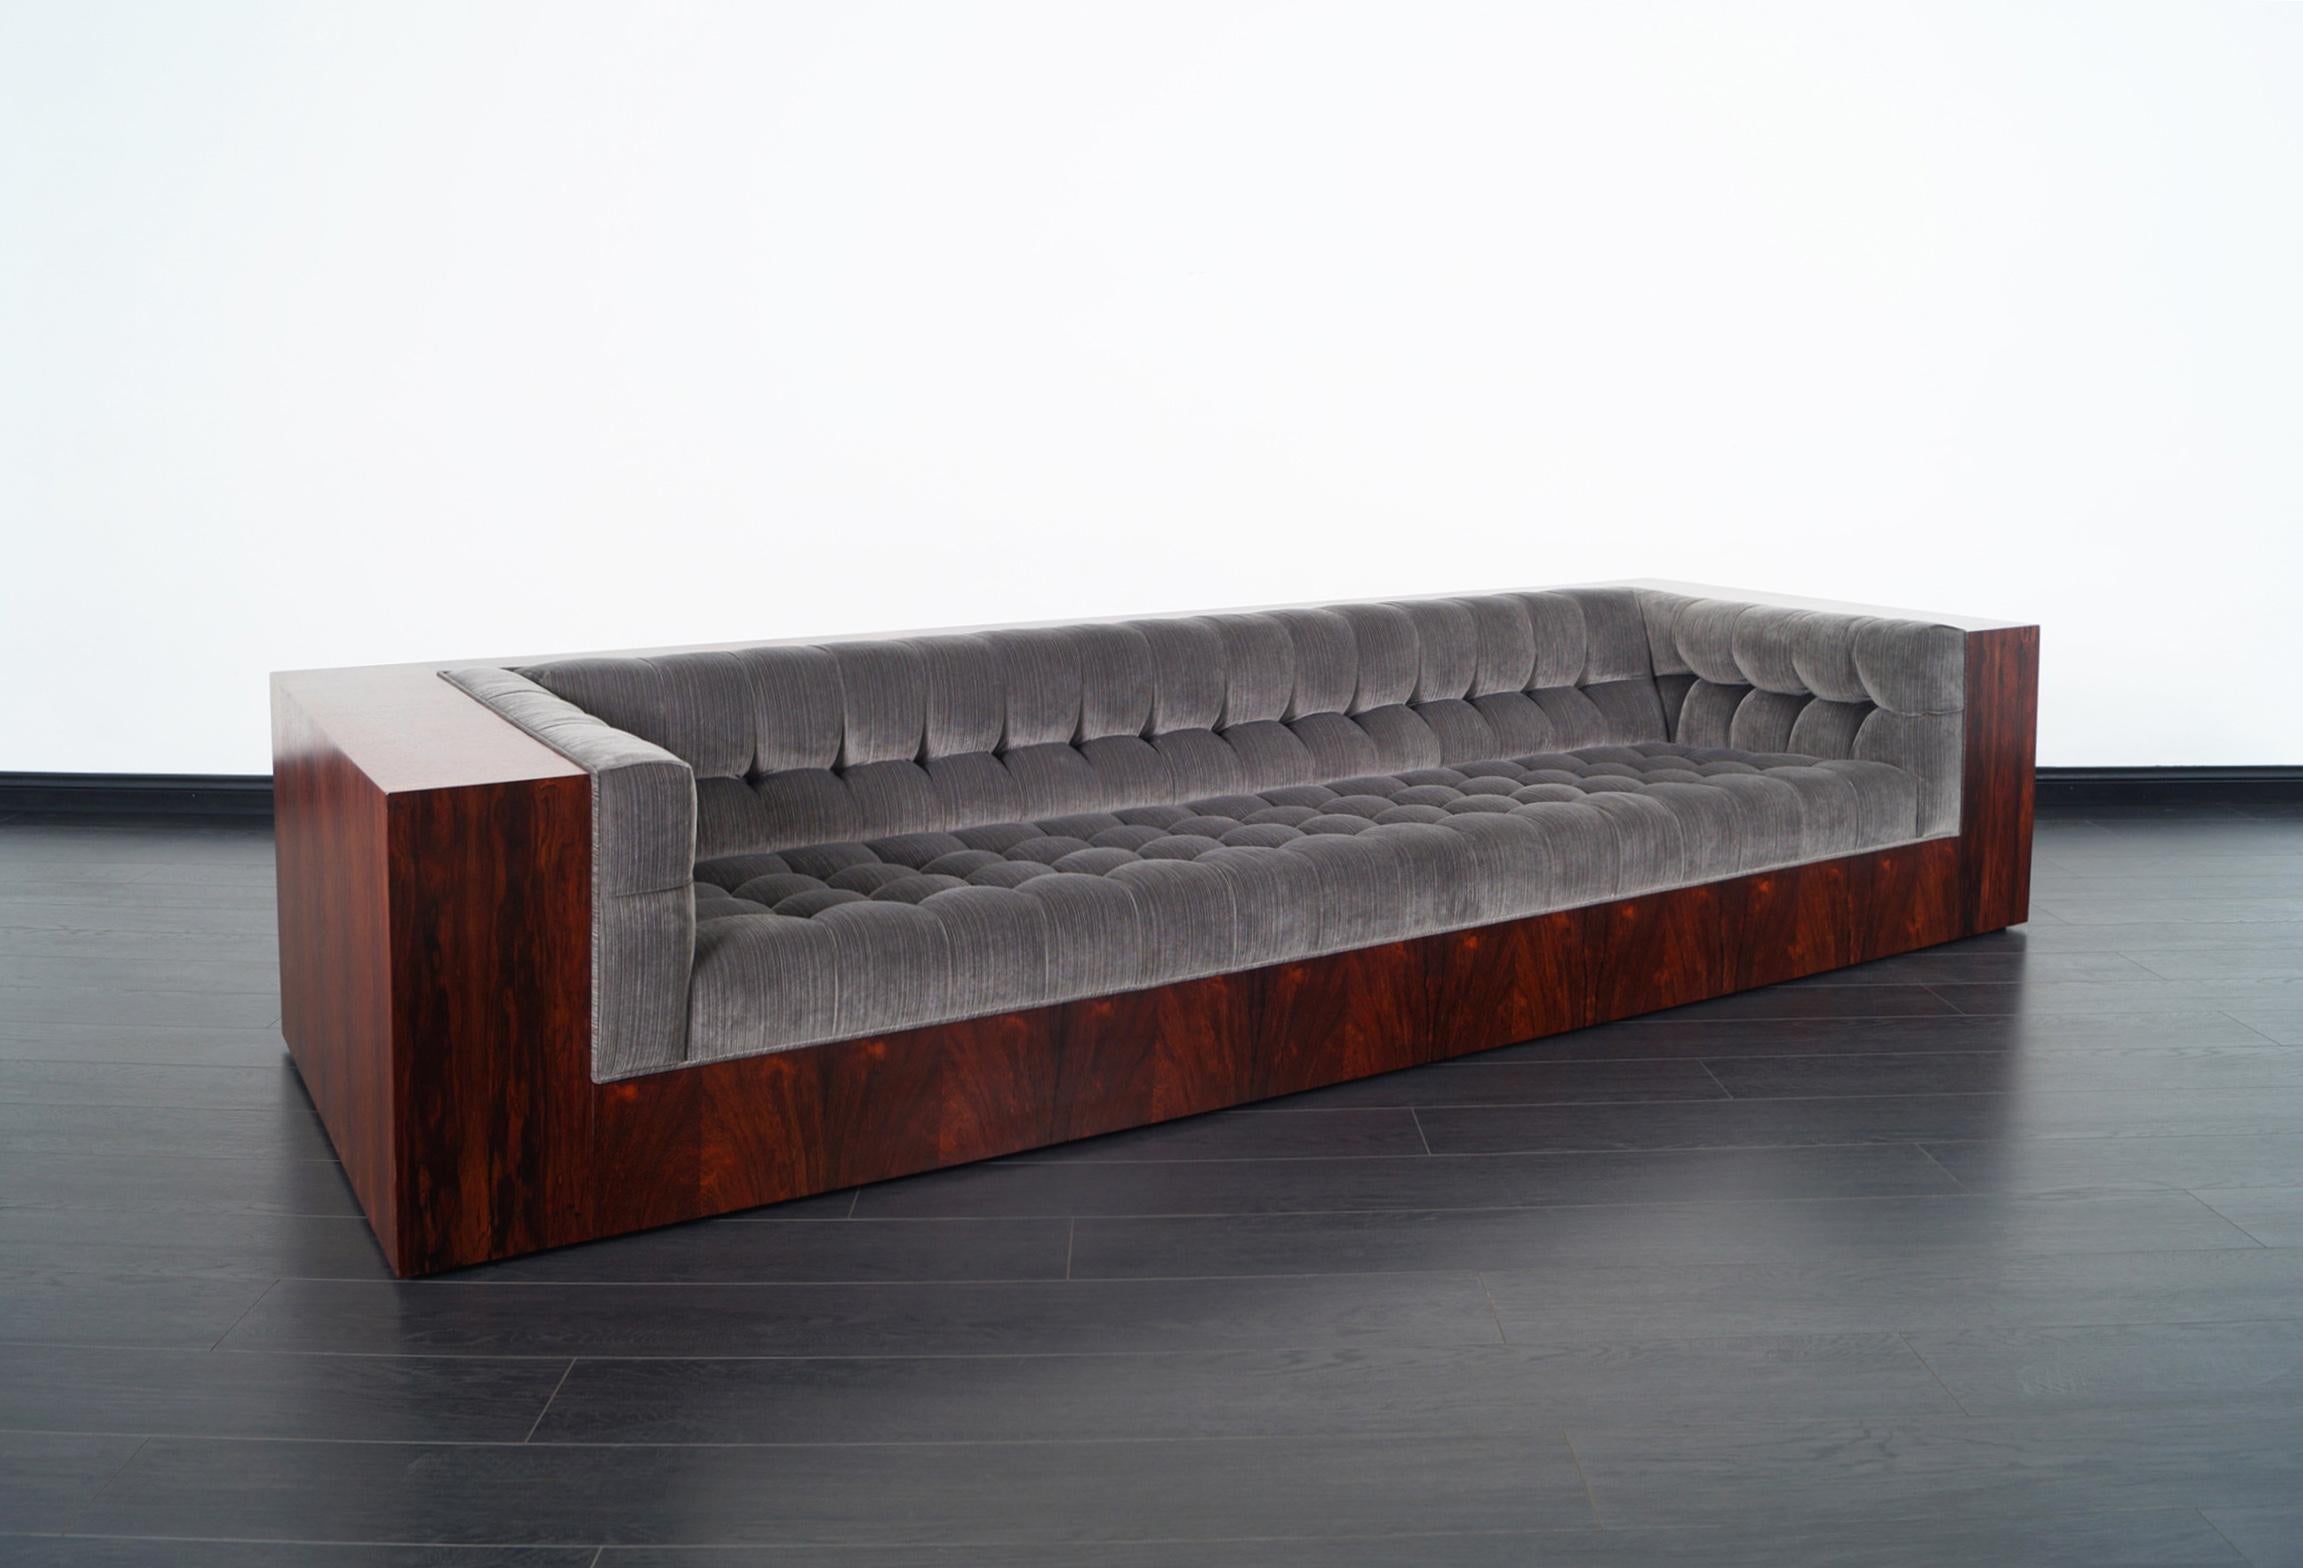 Incredibly stunning vintage rosewood sofa designed by iconic designer Milo Baughman for Thayer Coggin. This exceptional sofa exposes extraordinary Brazilian rosewood grain. Newly reupholstered in custom biscuit tufted upholstery in fine velvet. Top